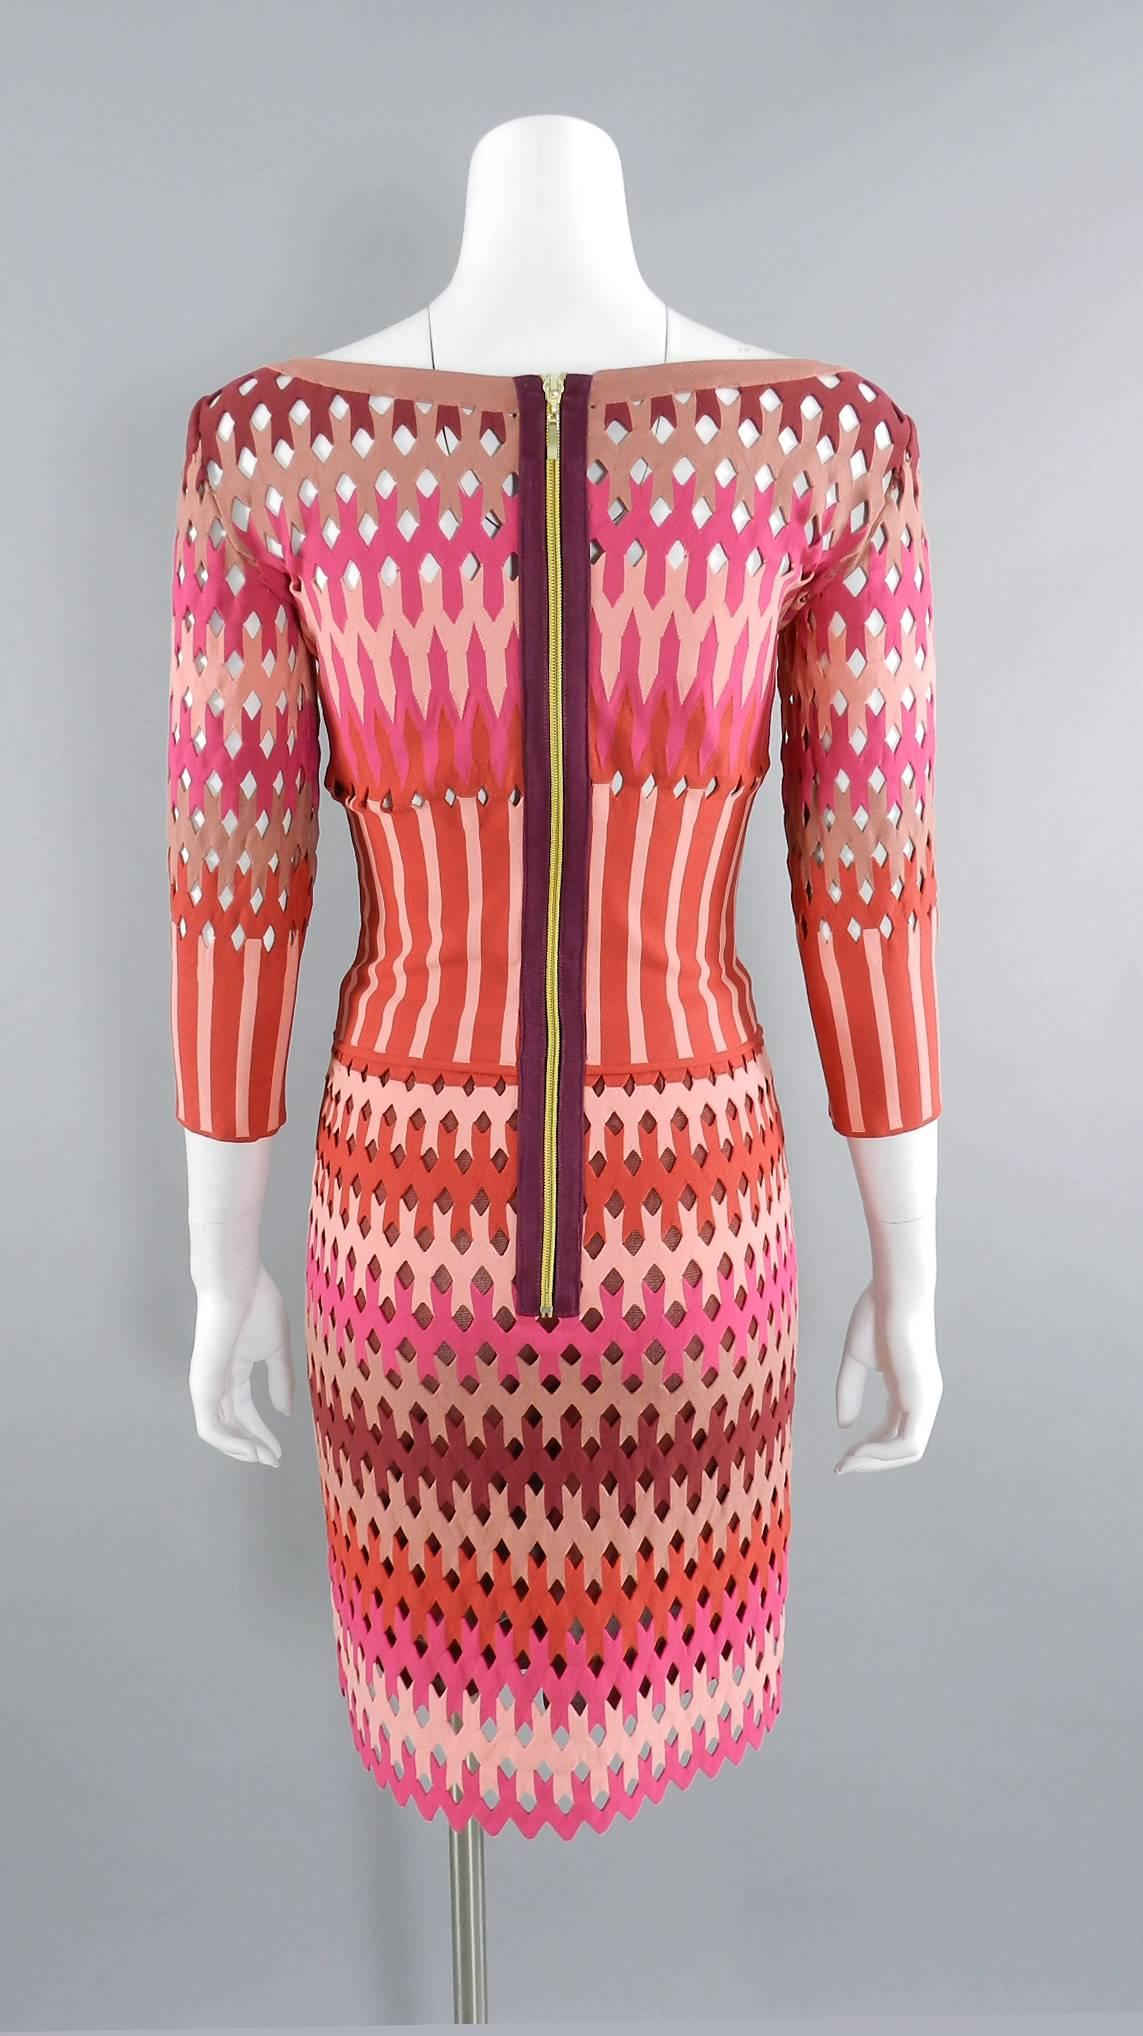 ALAIA red and pink cut out diamonds bodycon stretch dress.  Gold centre back zipper, 3/4 length sleeves, fitted silhouette. Size small (USA 4/6). To fit 34/35" bust person, about 27" waist, 36" hip, 15.5" shoulder seams, 17"